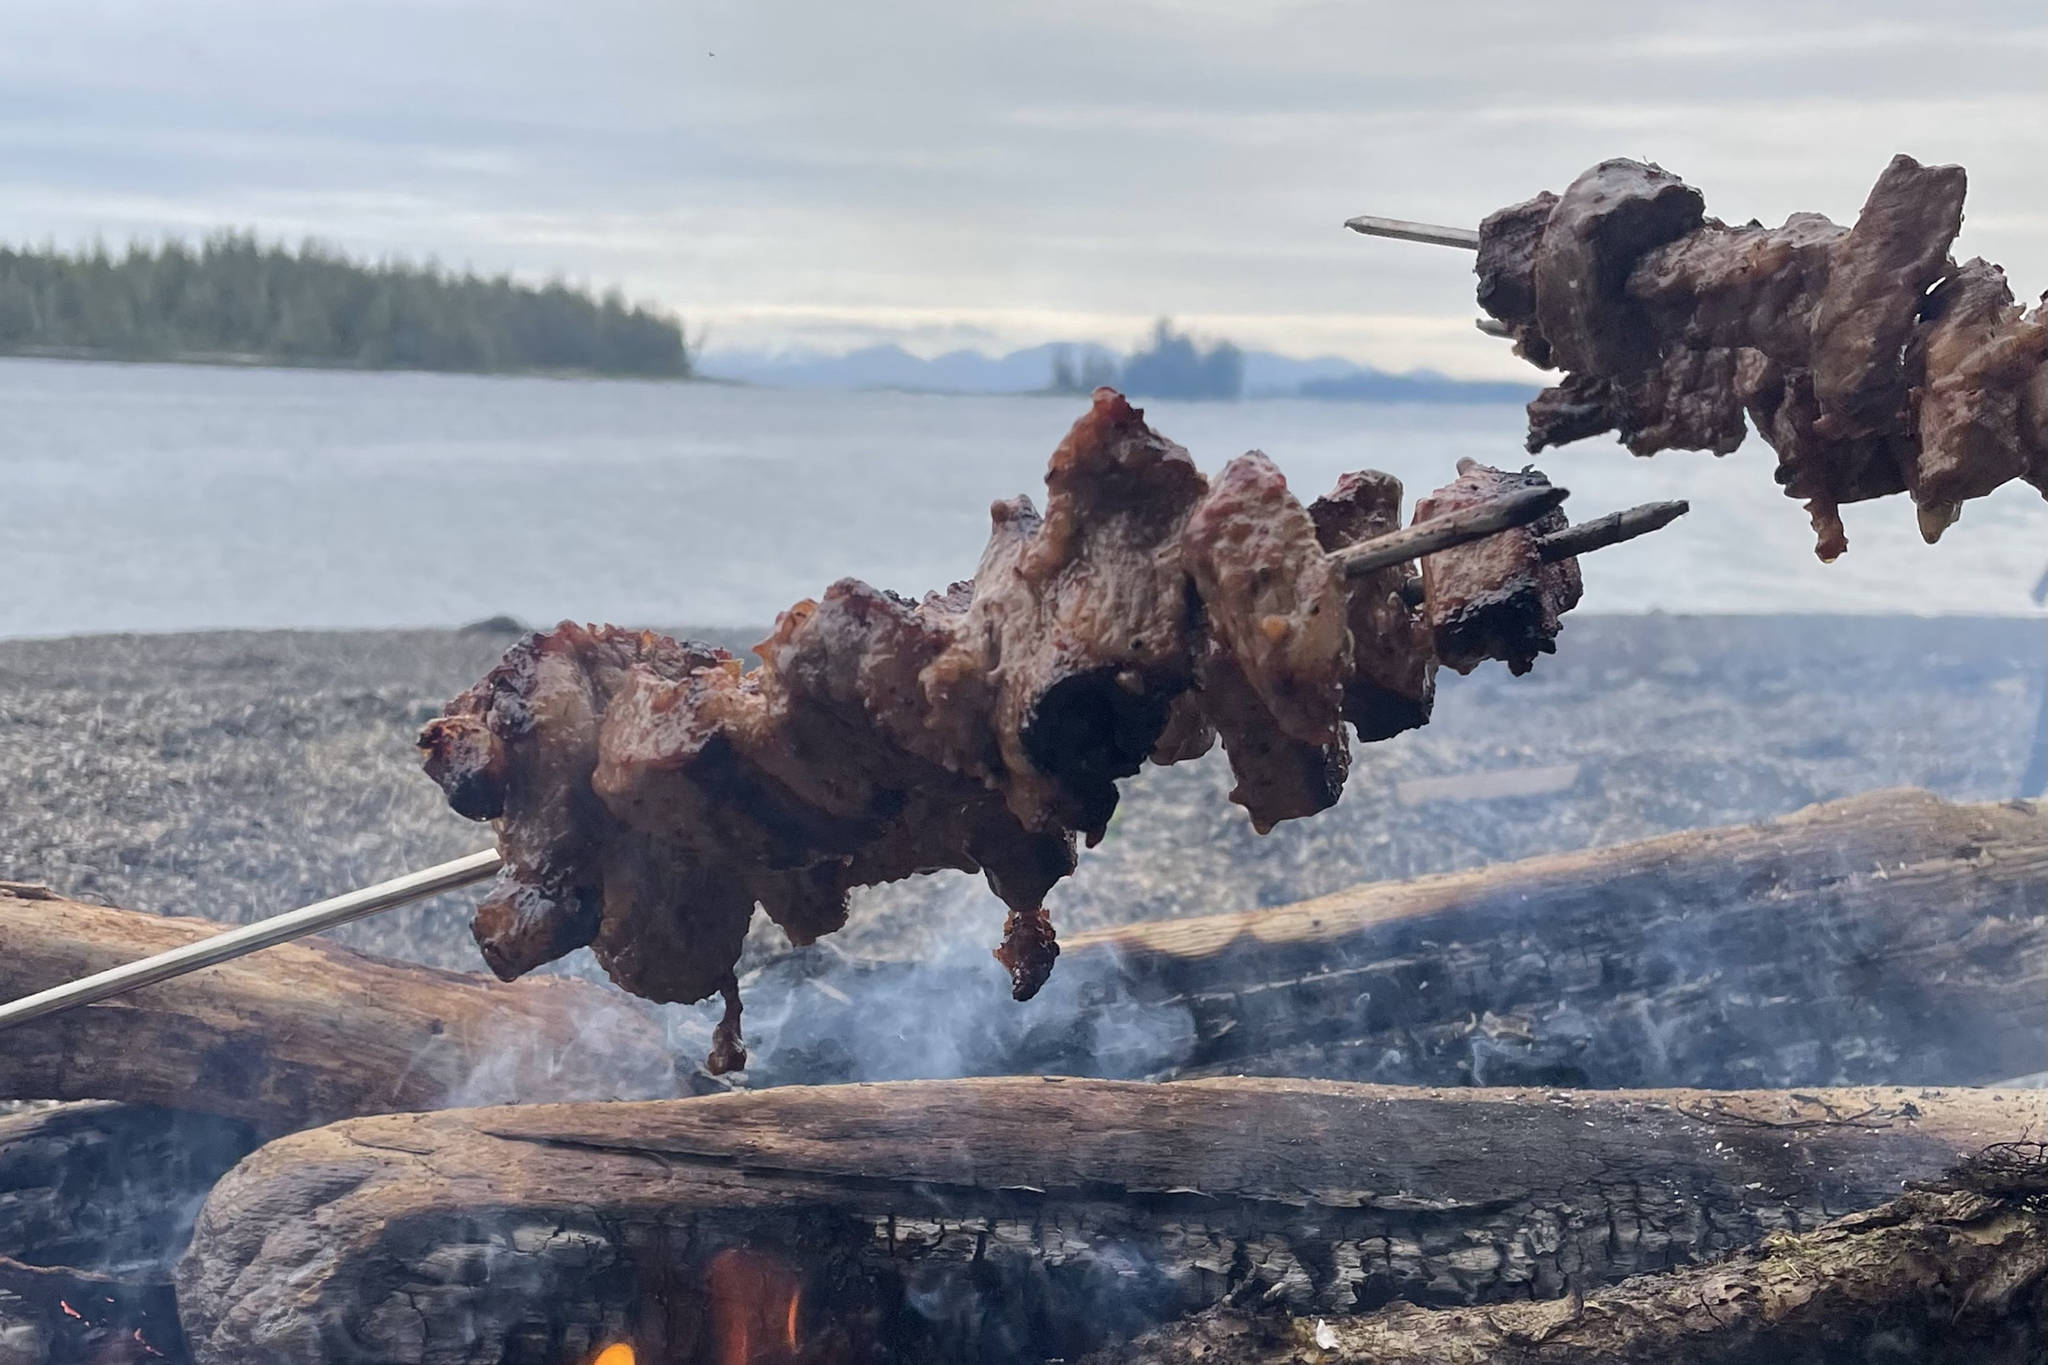 The author cooks steak over a beach fire over the Memorial Day weekend. (Jeff Lund / For the Juneau Empire)